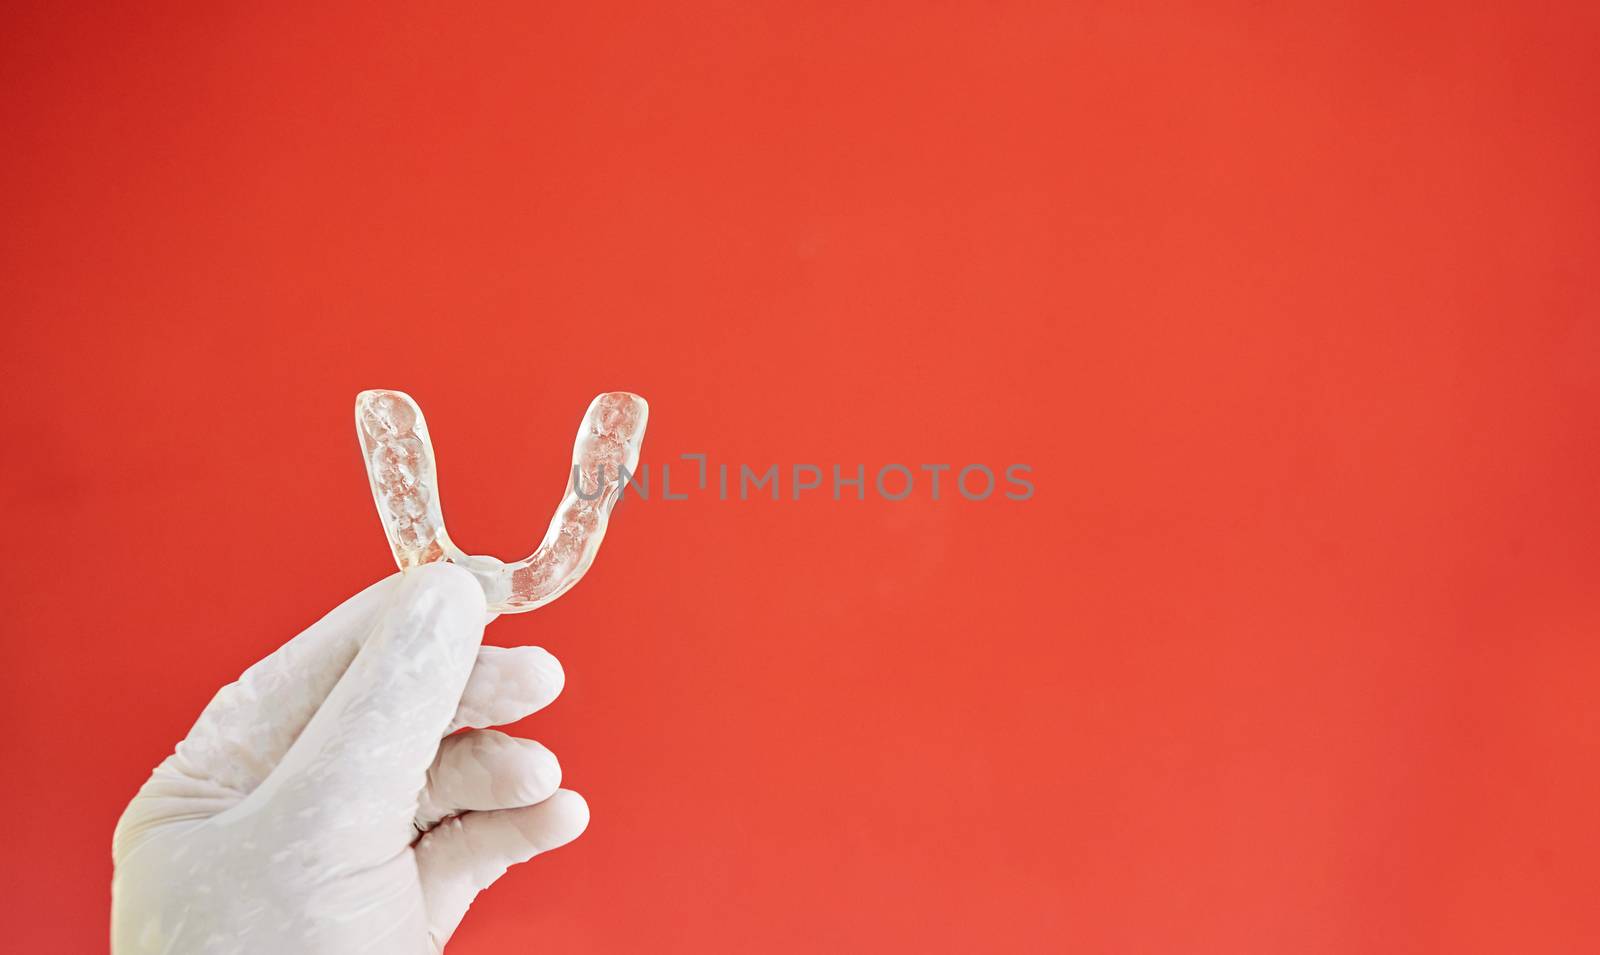 Invisible bracelets on a red background held in one hand by a latex glove